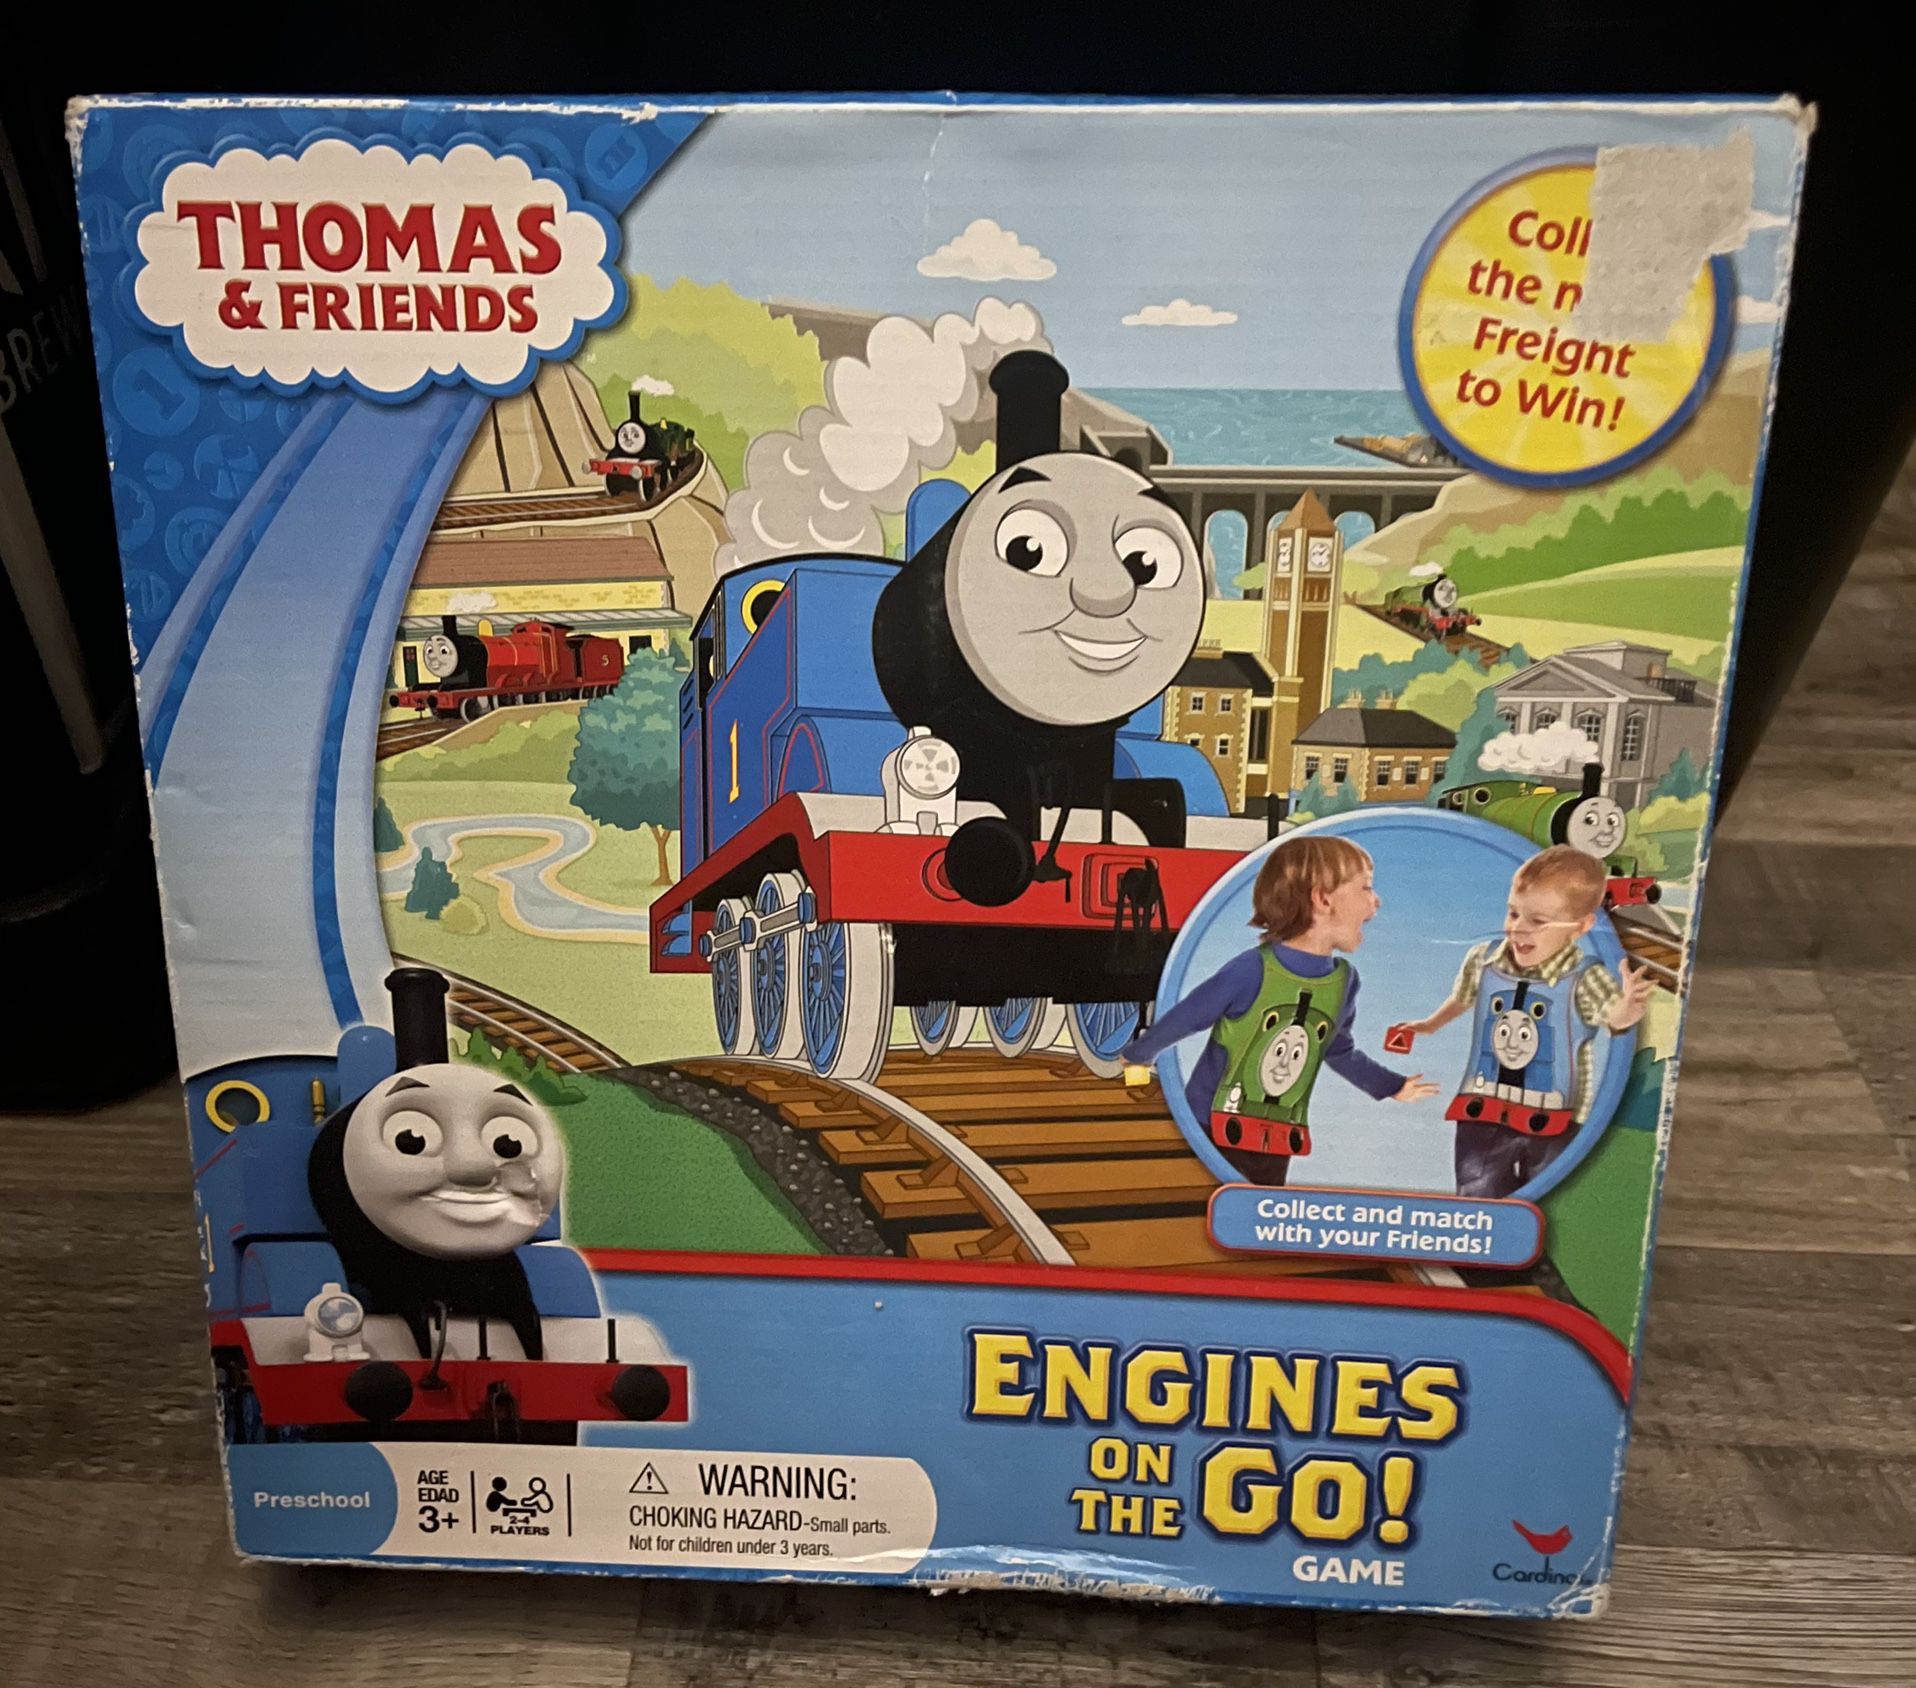 Thomas & Friends Engines on the Go Game